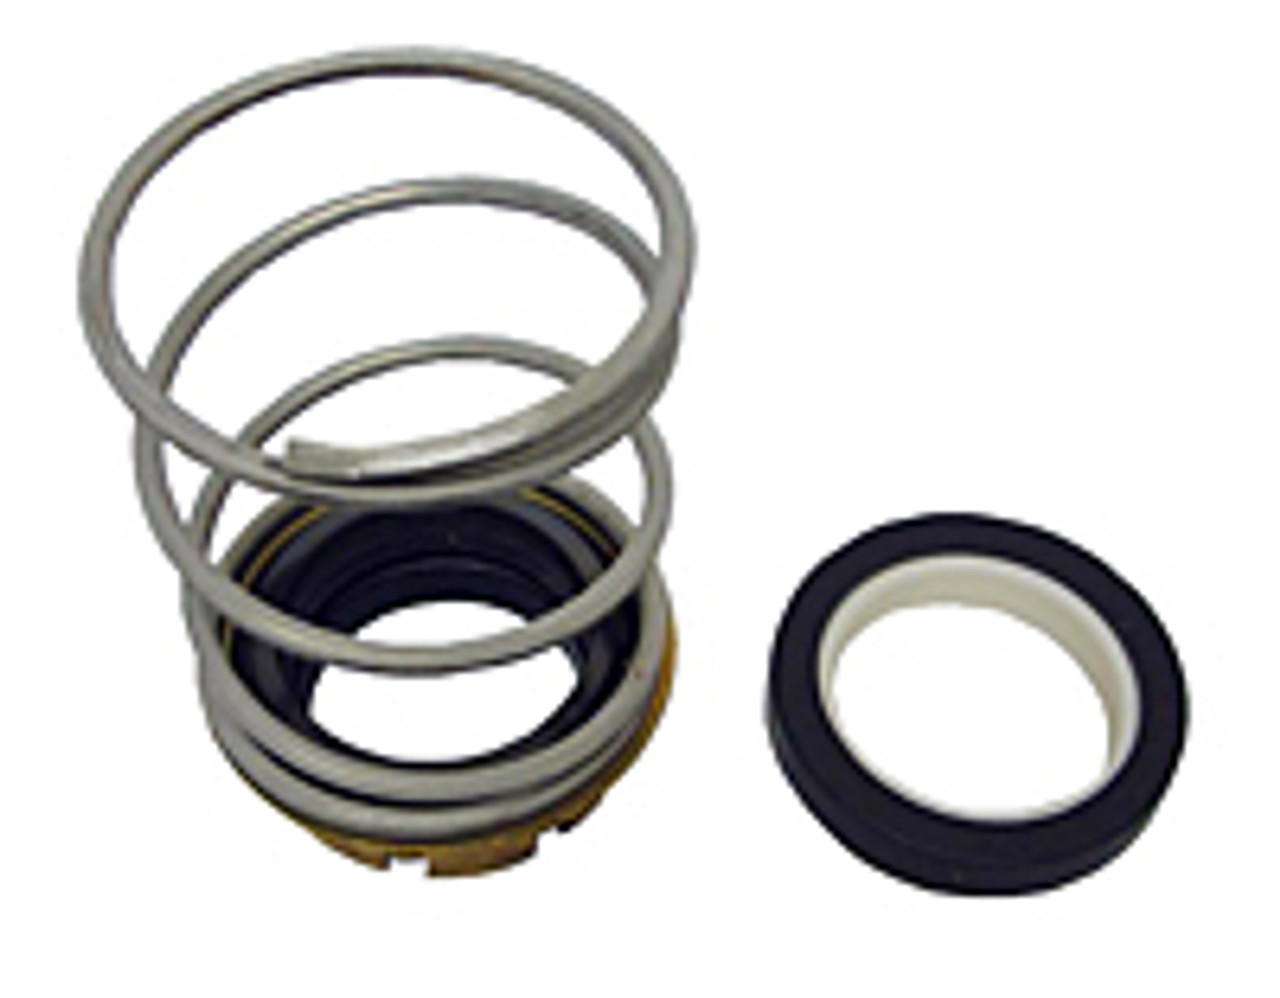 Armstrong Pumps Seal Kit For 3/4" OEM 816707-001 